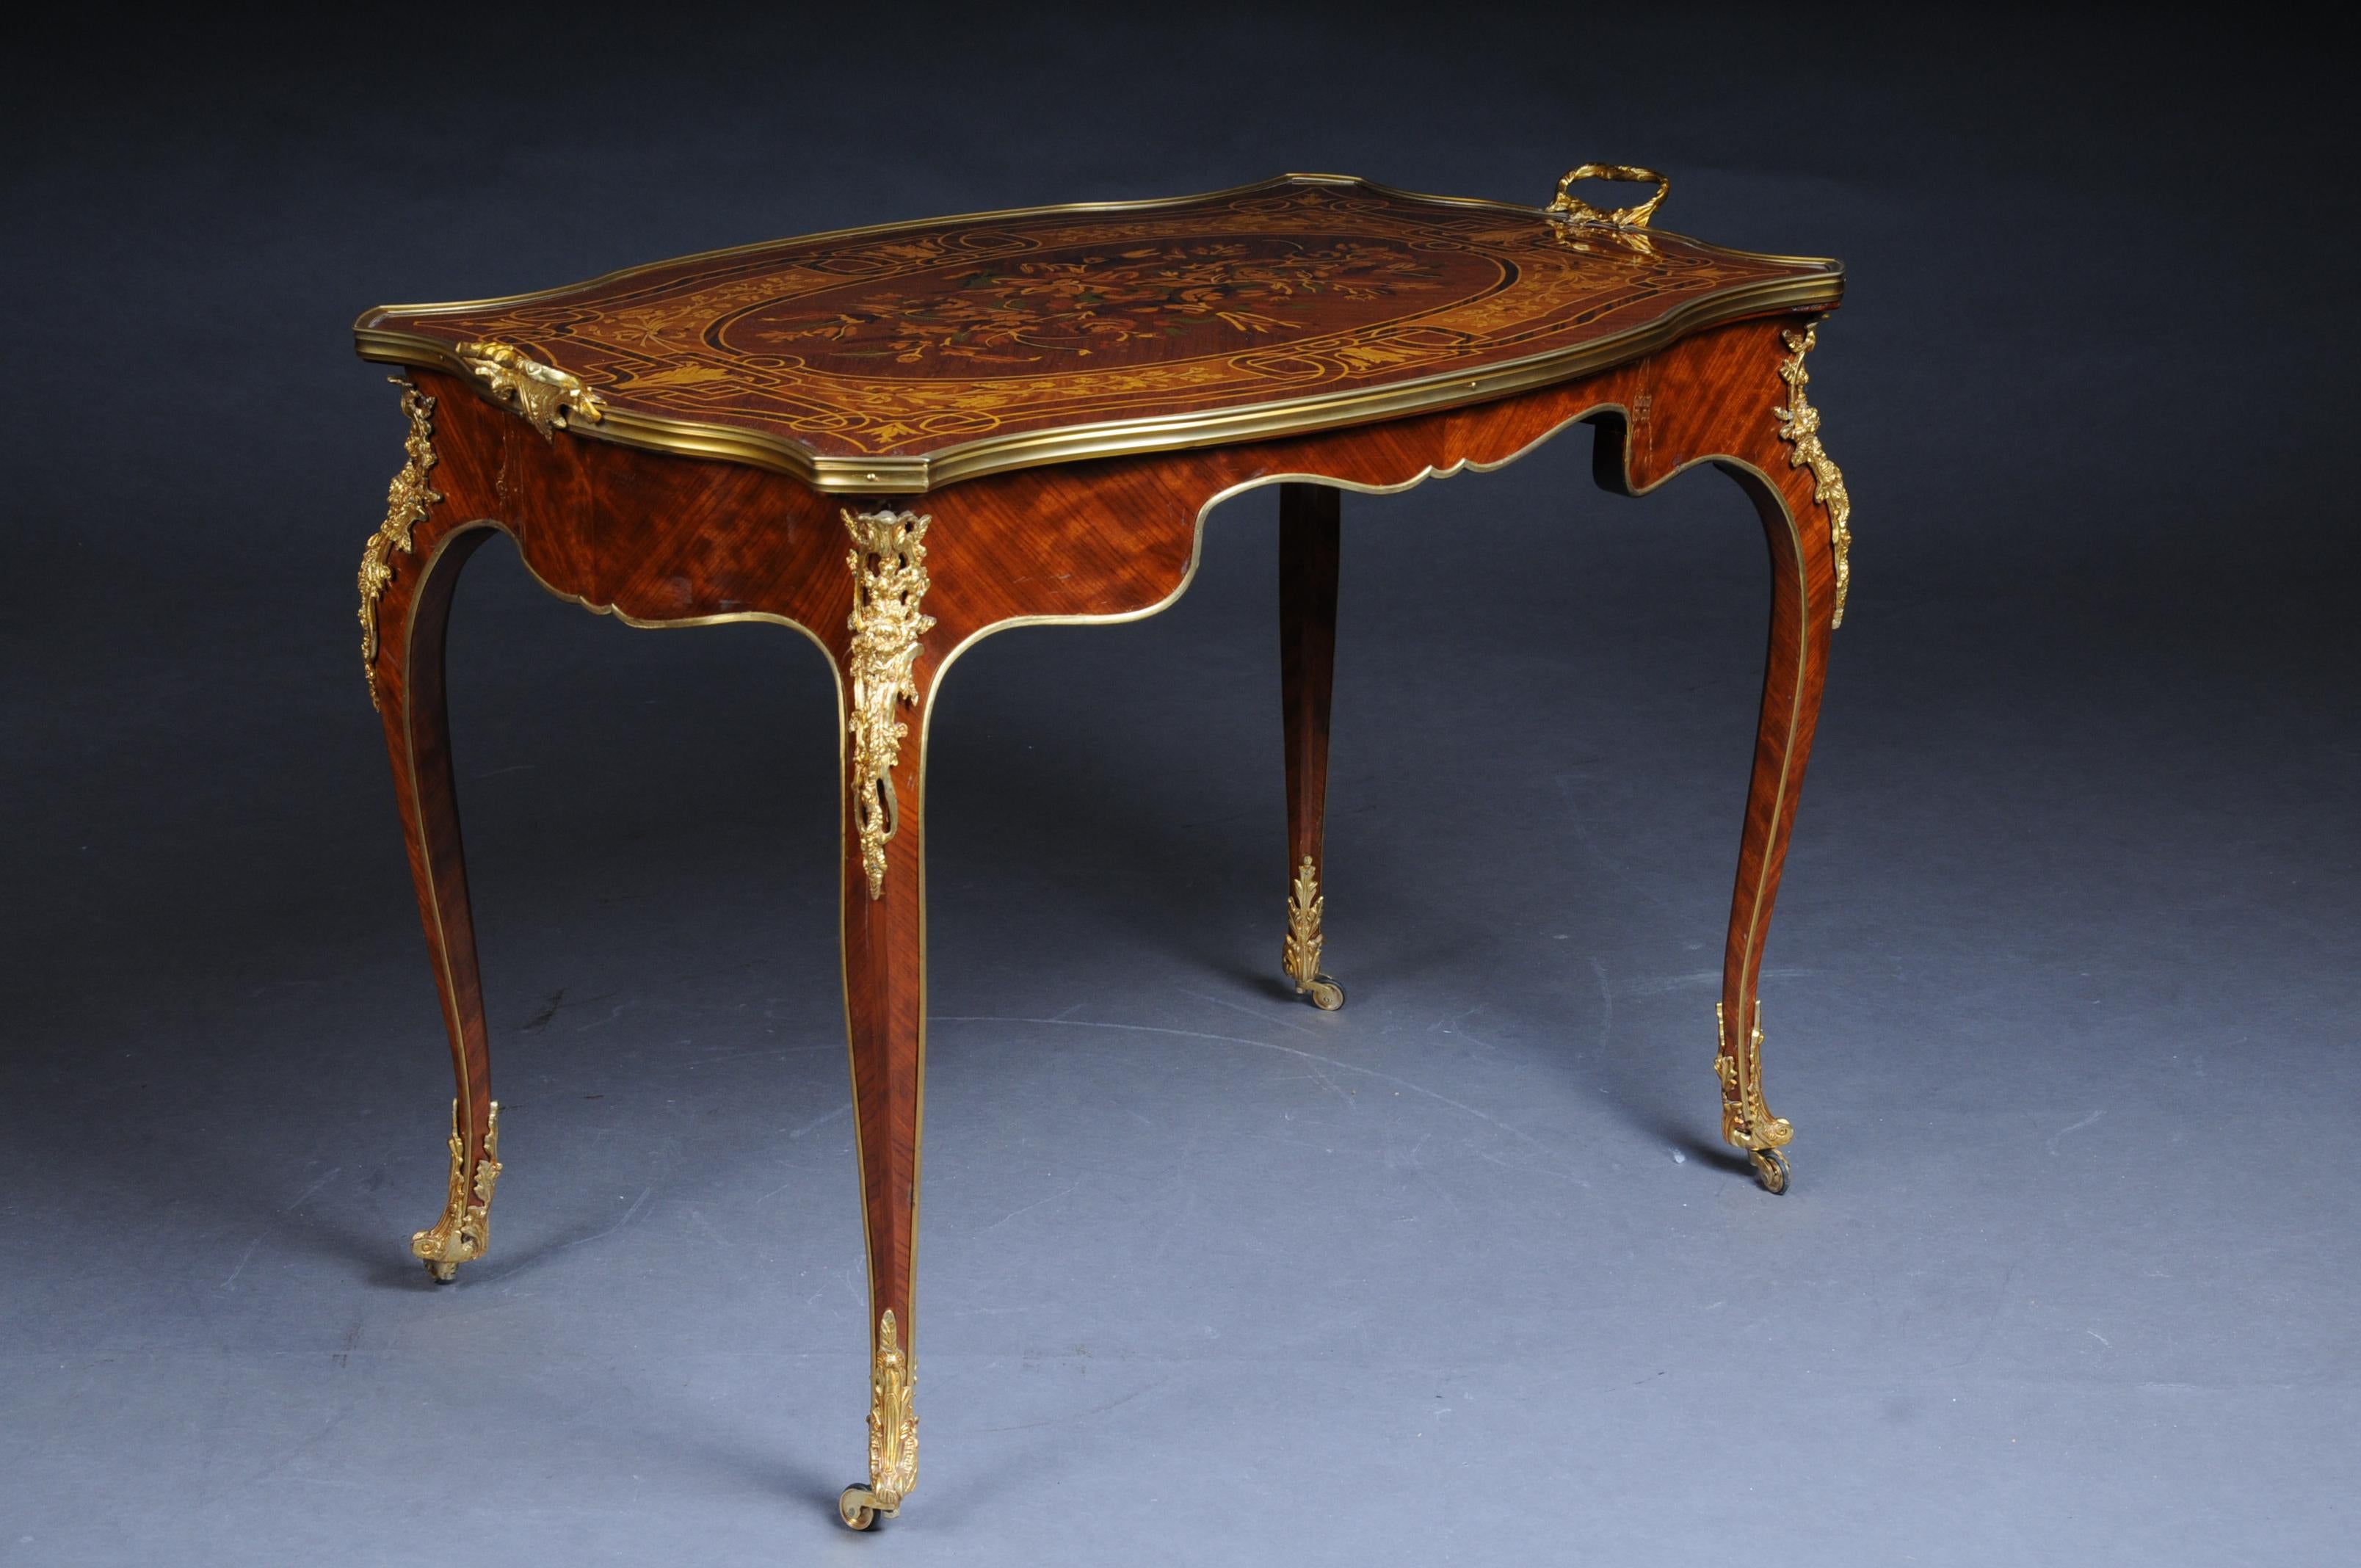 Elegant French Salon Table in Louis Quinze Style In Good Condition For Sale In Berlin, DE